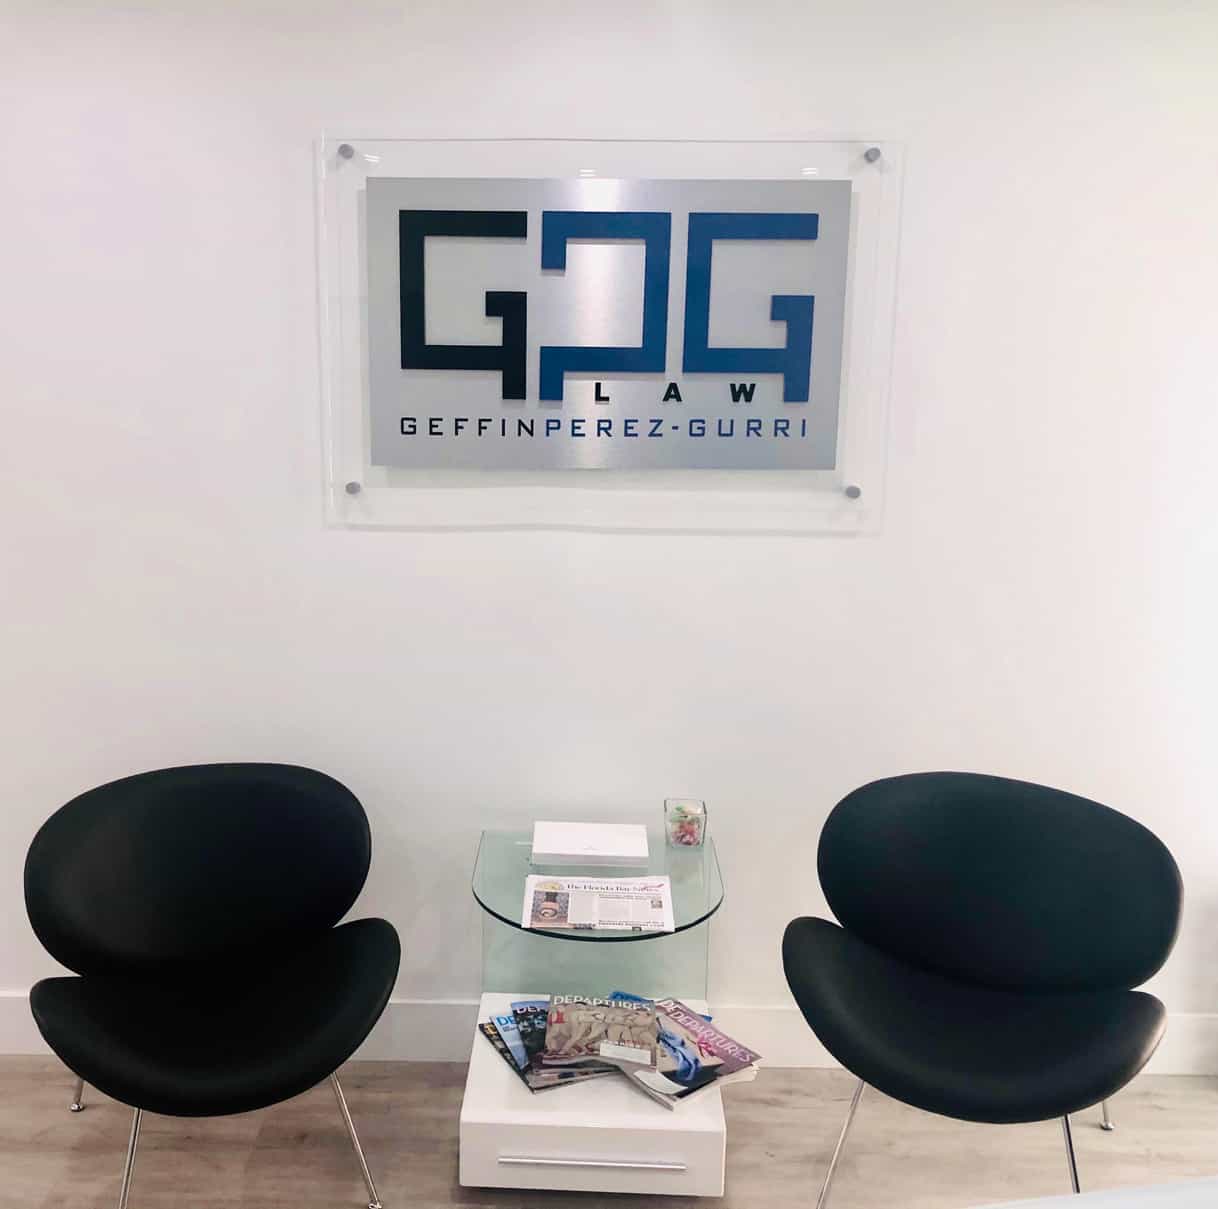 Reception area of GPG Law office